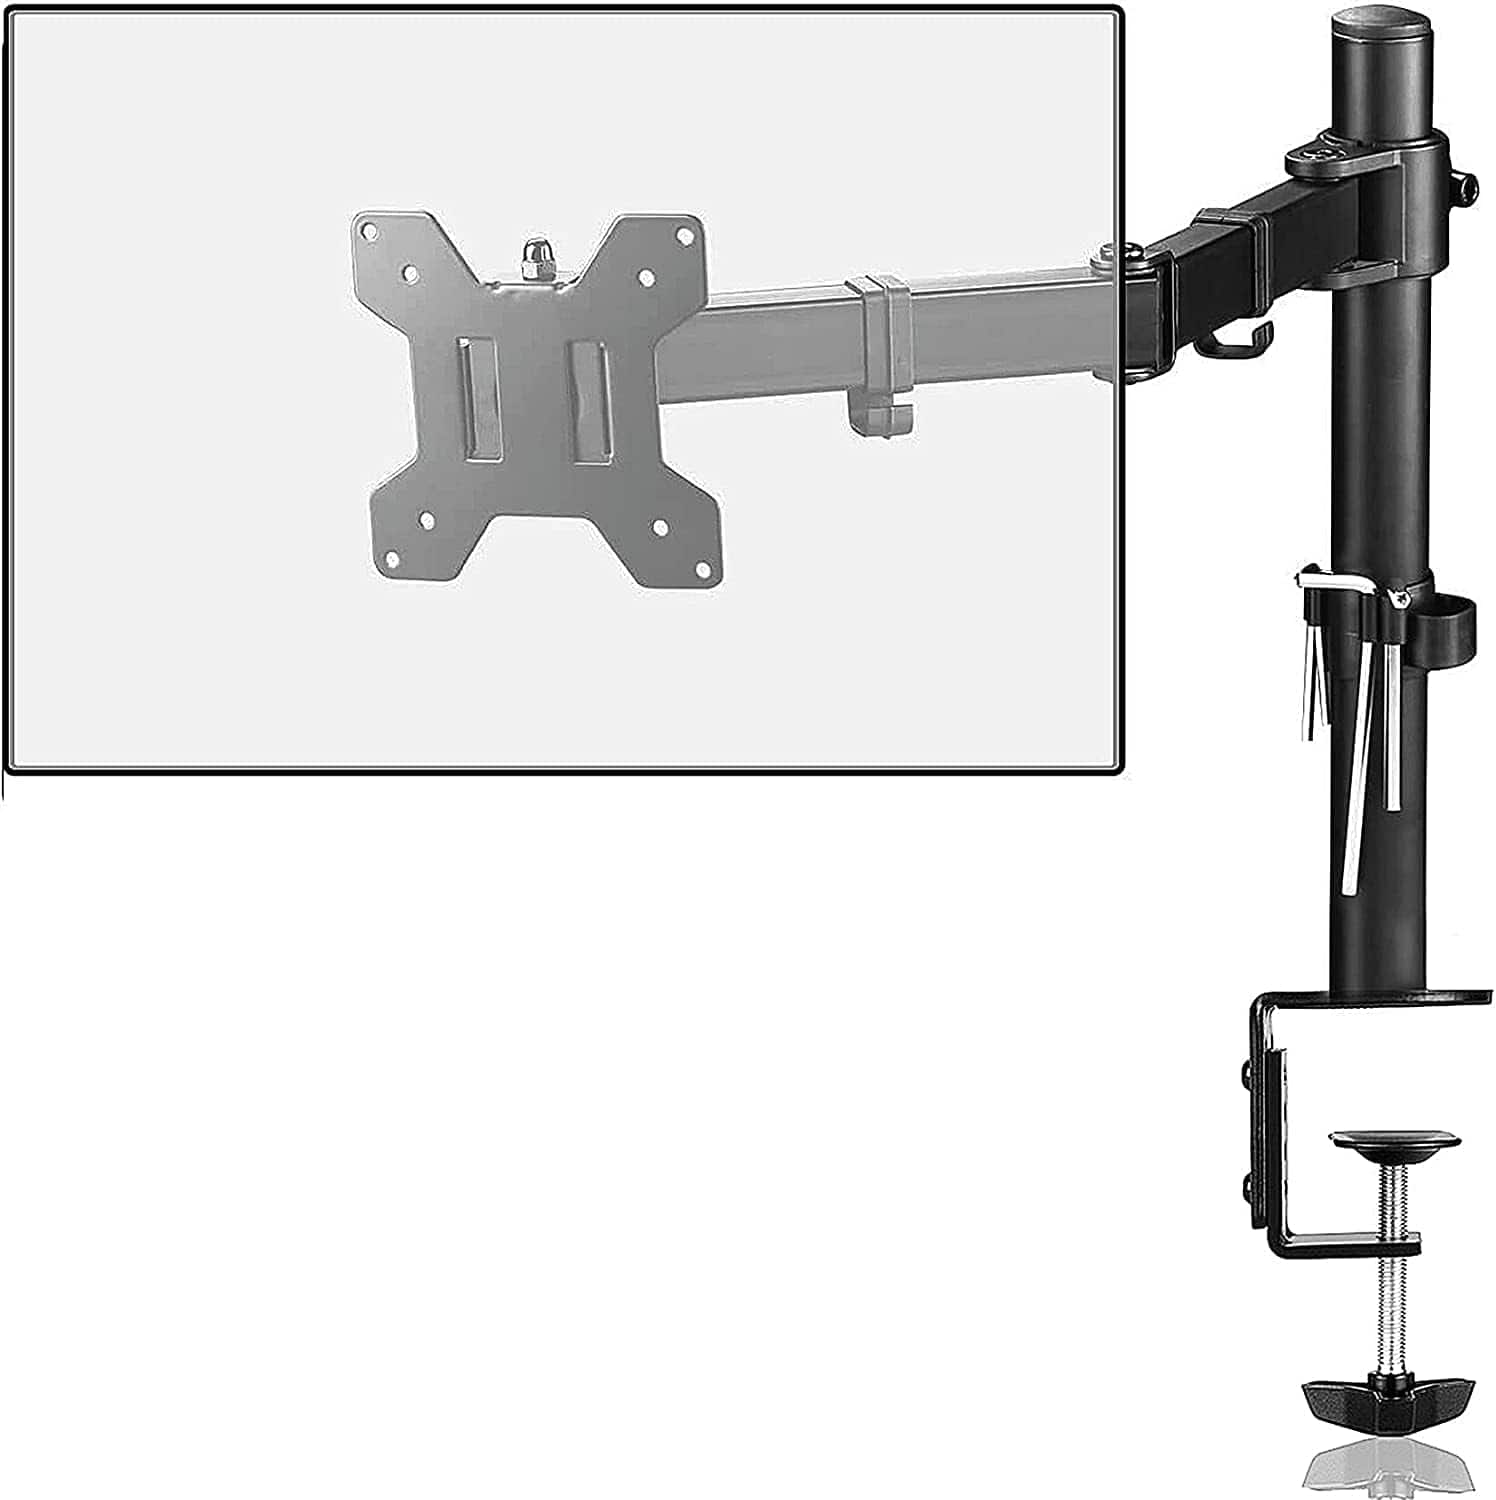 Single Adjustable Monitor Desk Mount Stand - MD6421 | Supply Master Accra, Ghana Home Accessories Buy Tools hardware Building materials